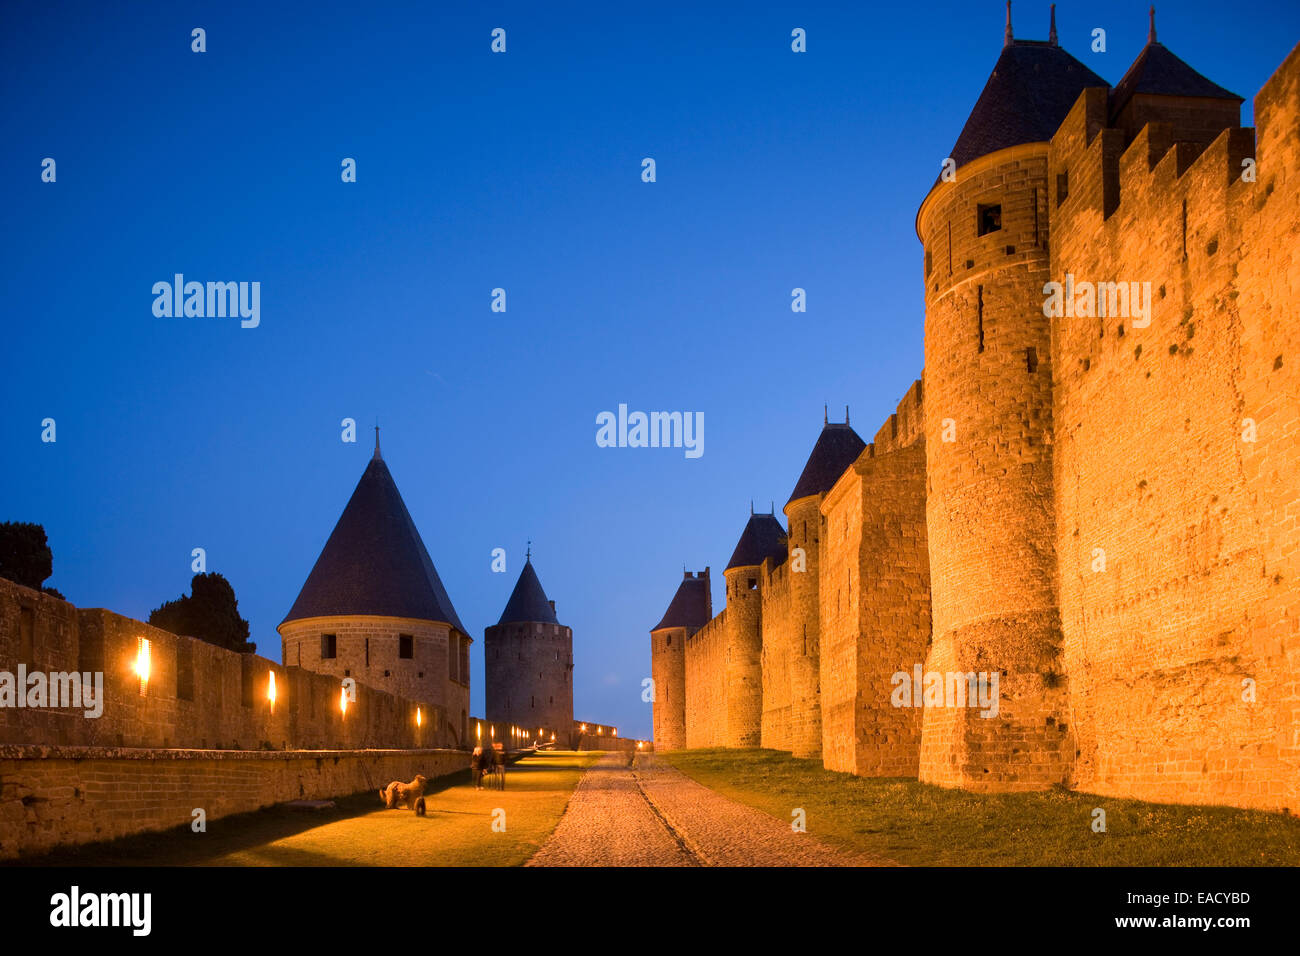 Fortress with watch towers, Carcassonne, Languedoc-Roussillon, Departement Aude, France Stock Photo